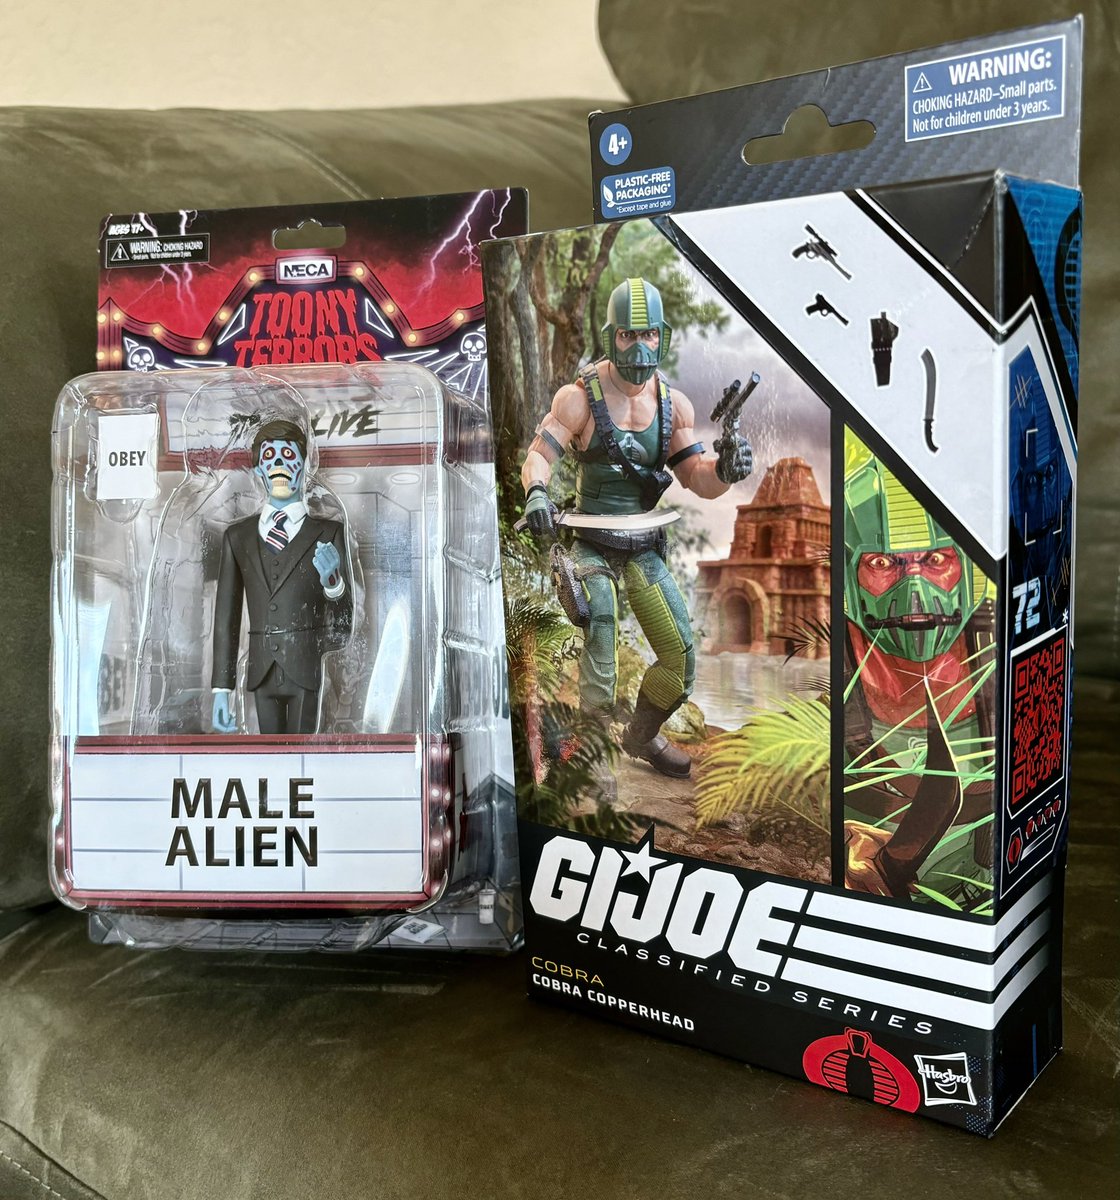 Two of my Christmas gifts! 🎁 #christmas #christmasgifts #theylive #obey #roddypiper #gijoe #cobra #actionfigure #actionfigures #toy #toys